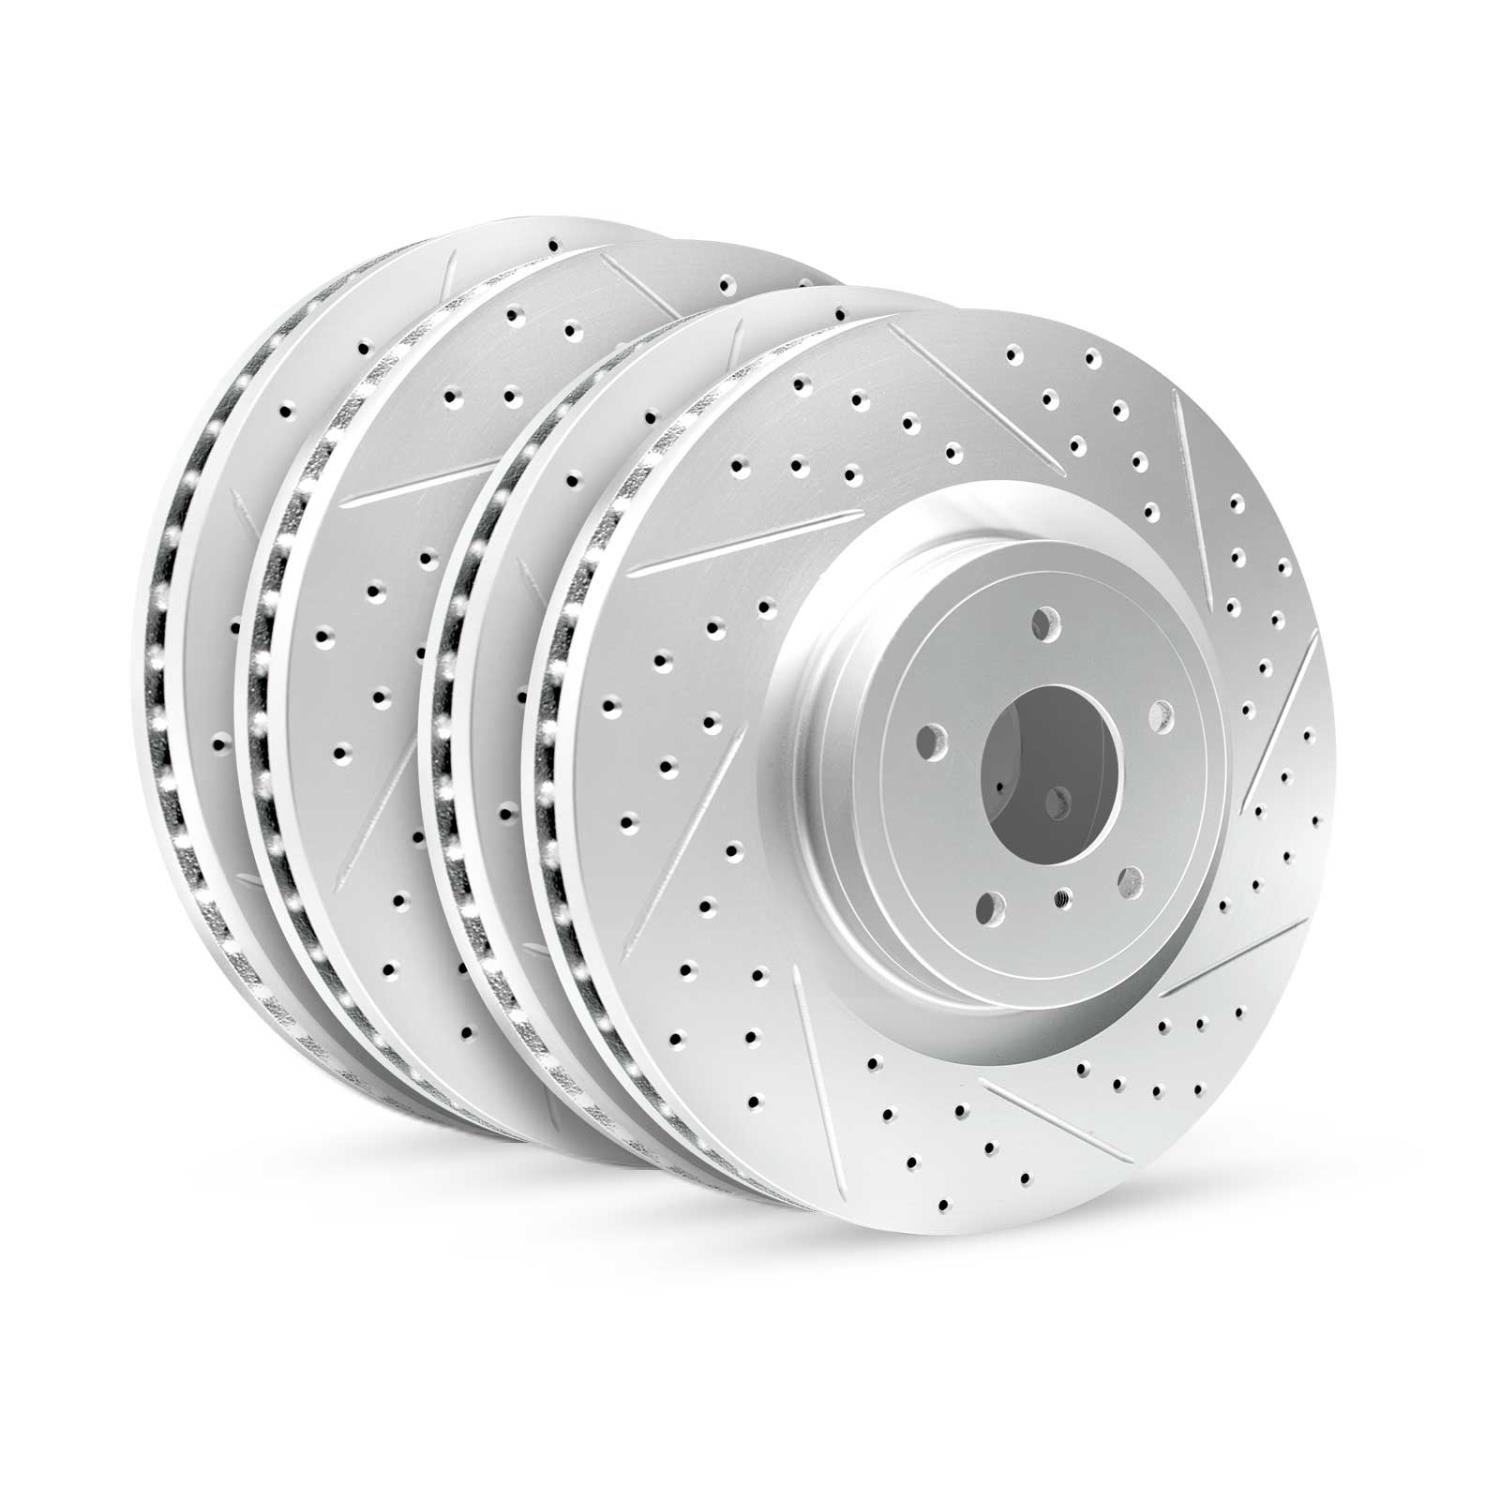 GEO-Carbon Drilled/Slotted Rotors, 2008-2008 Subaru, Position: Front/Rear